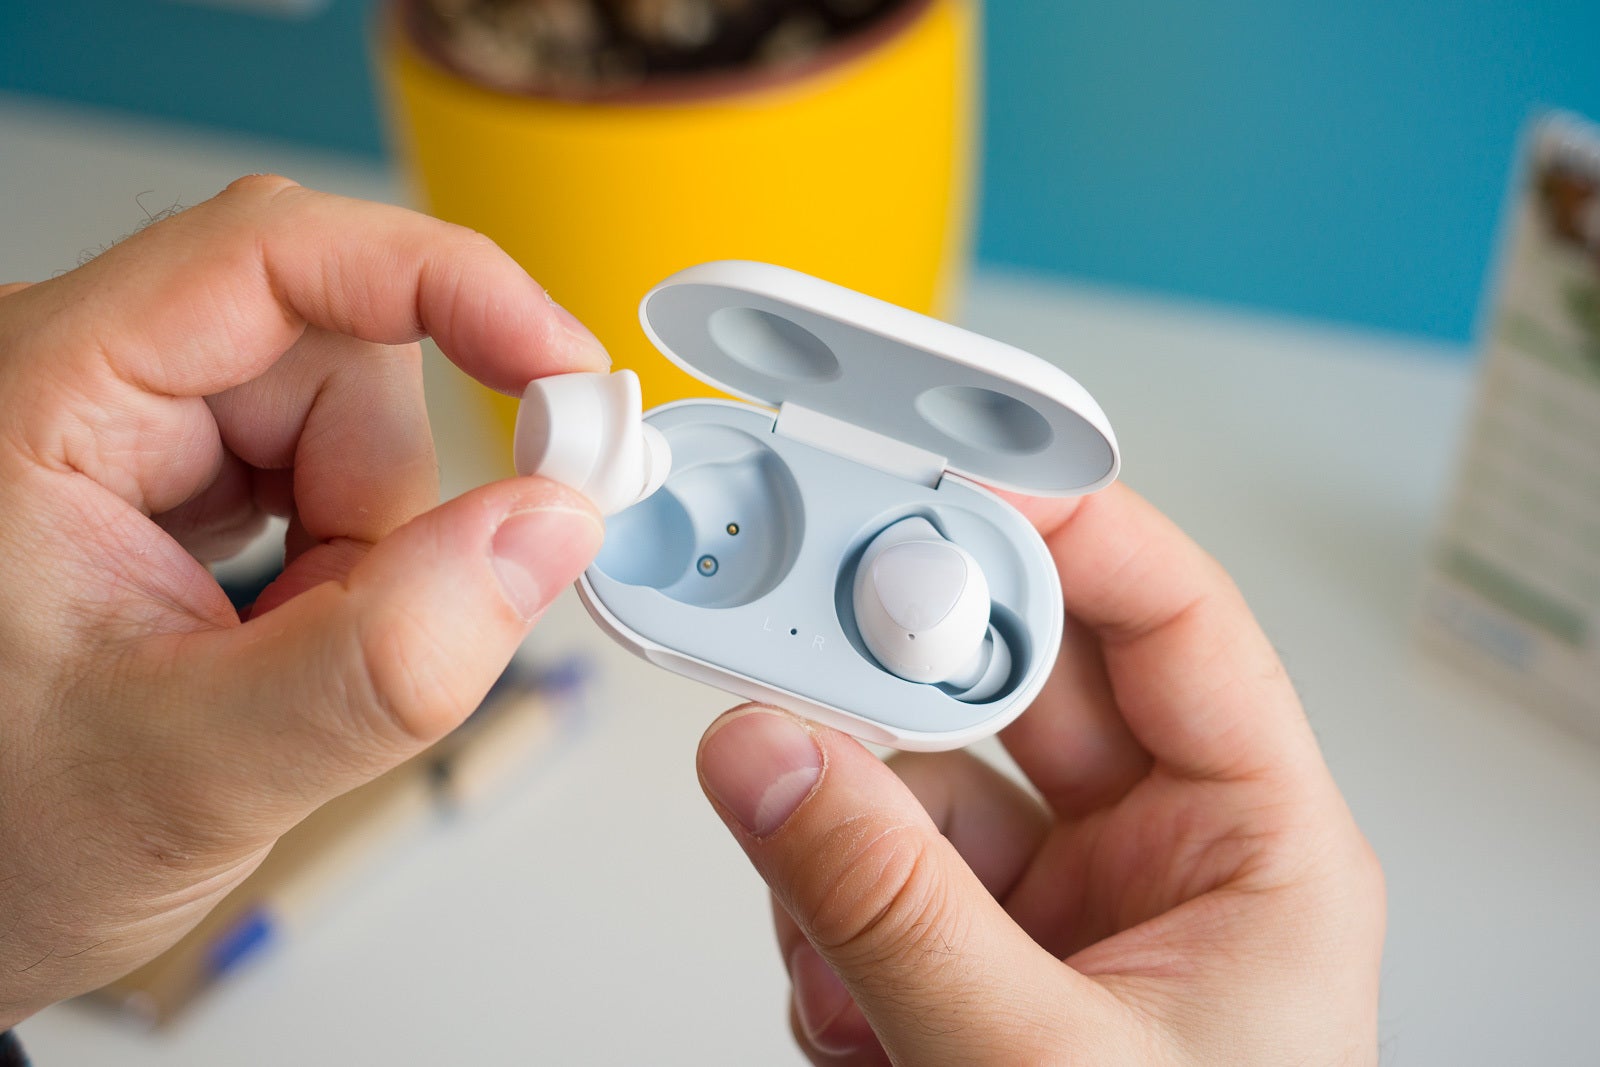 Best Samsung Galaxy Buds deals right now - updated March 2022